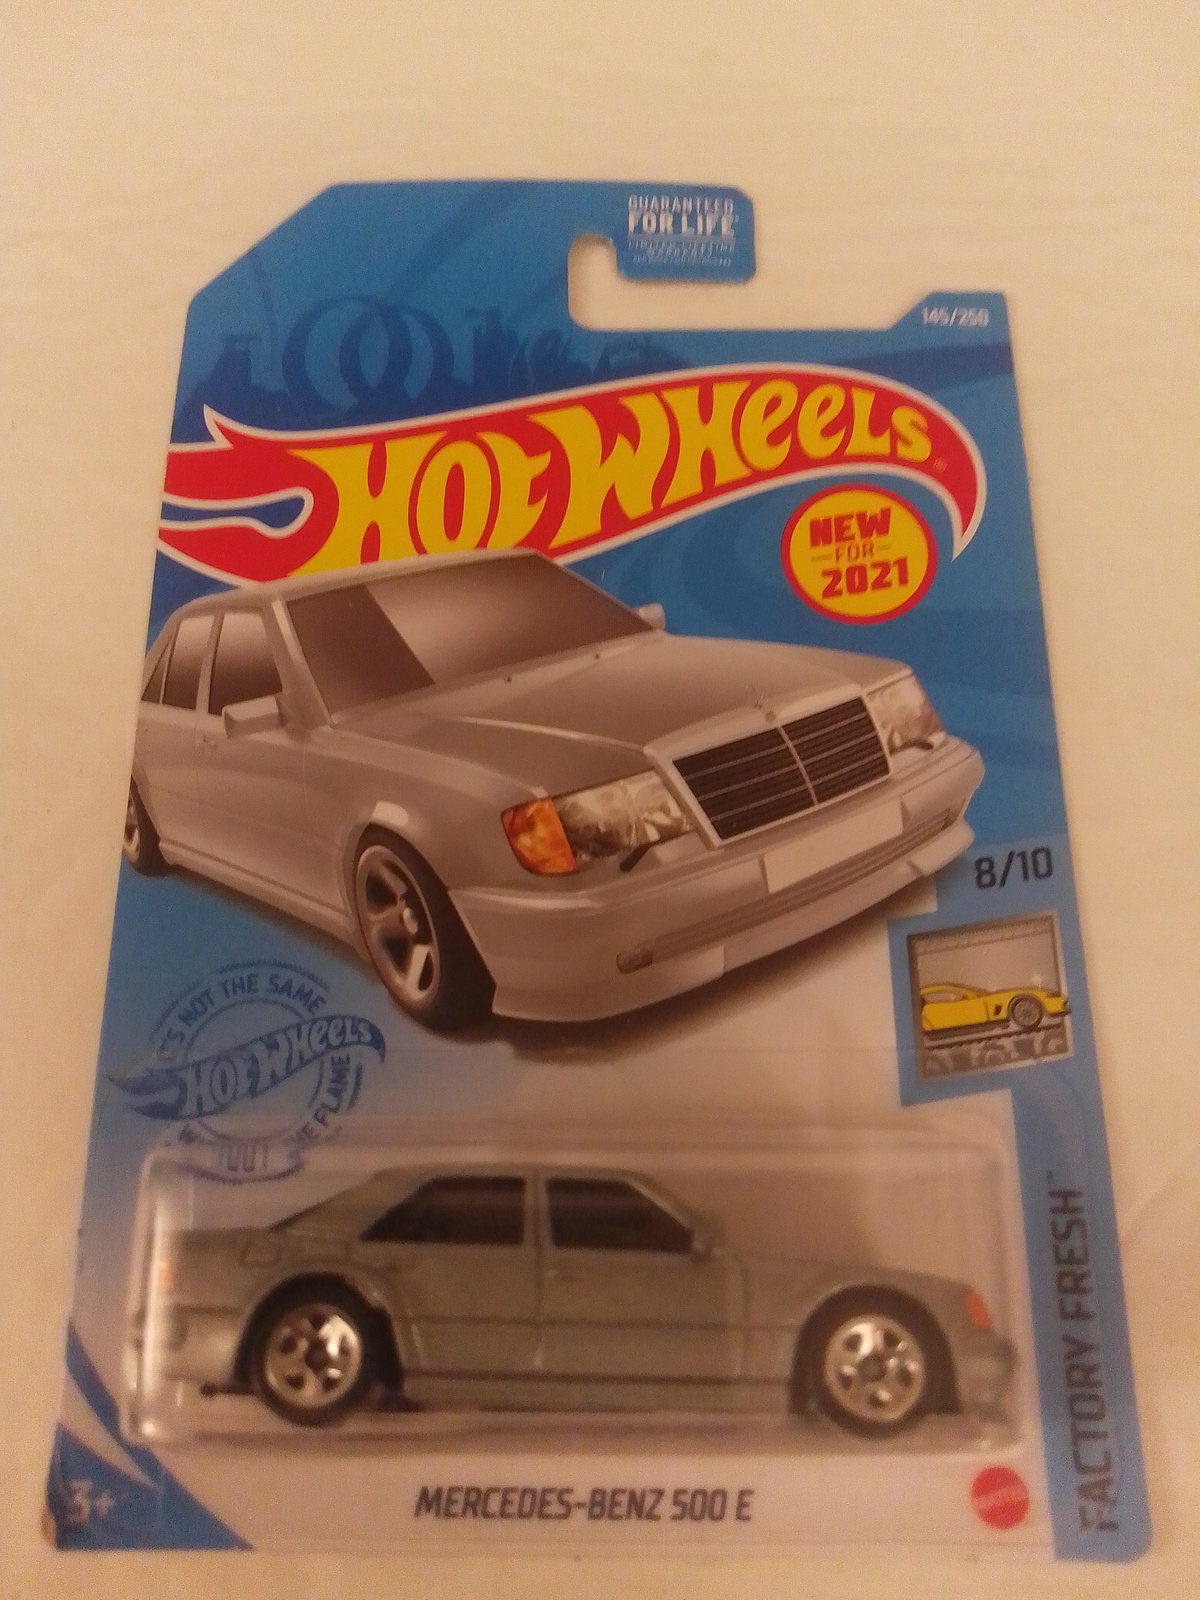 Primary image for Hot Wheels 2021 #145 Silver Mercedes Benz 500E Factory Fresh Series 08/10 MOC